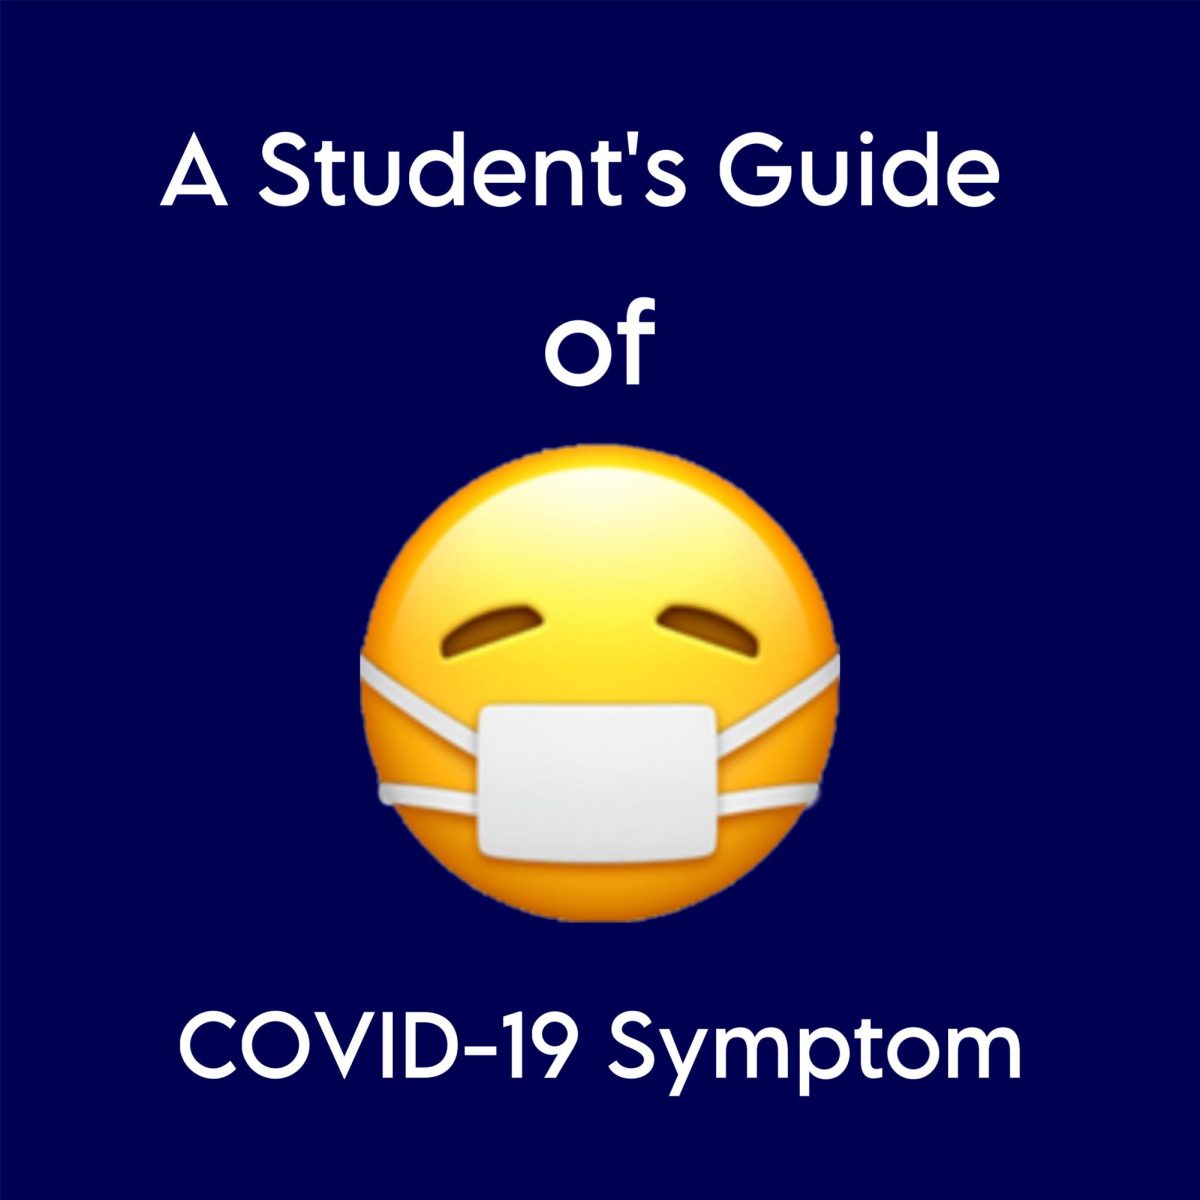 A Students Guide of COVID-19 Symptoms